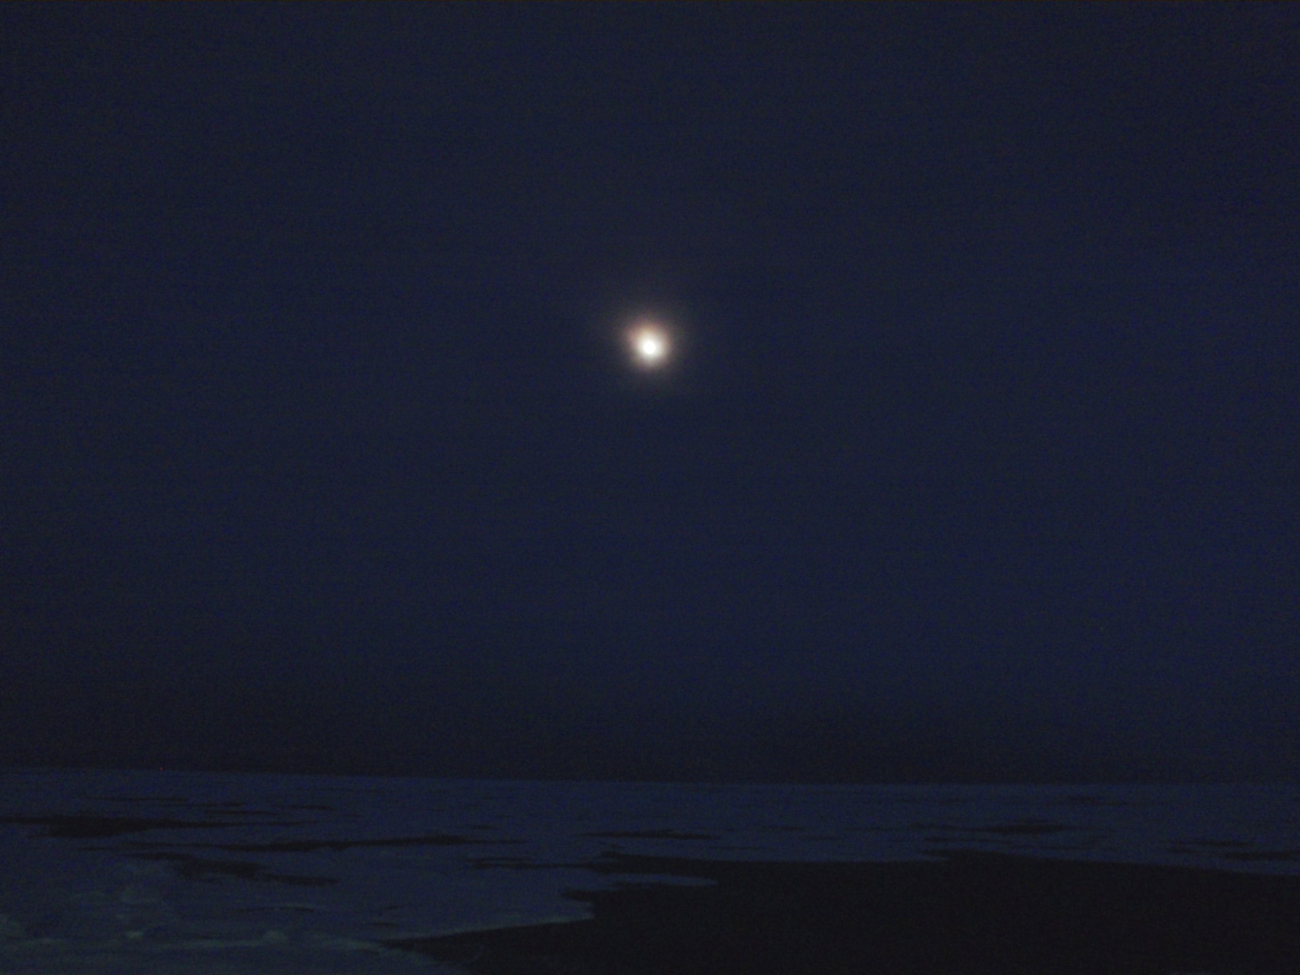 Moon and ice floes seen in an Arctic night